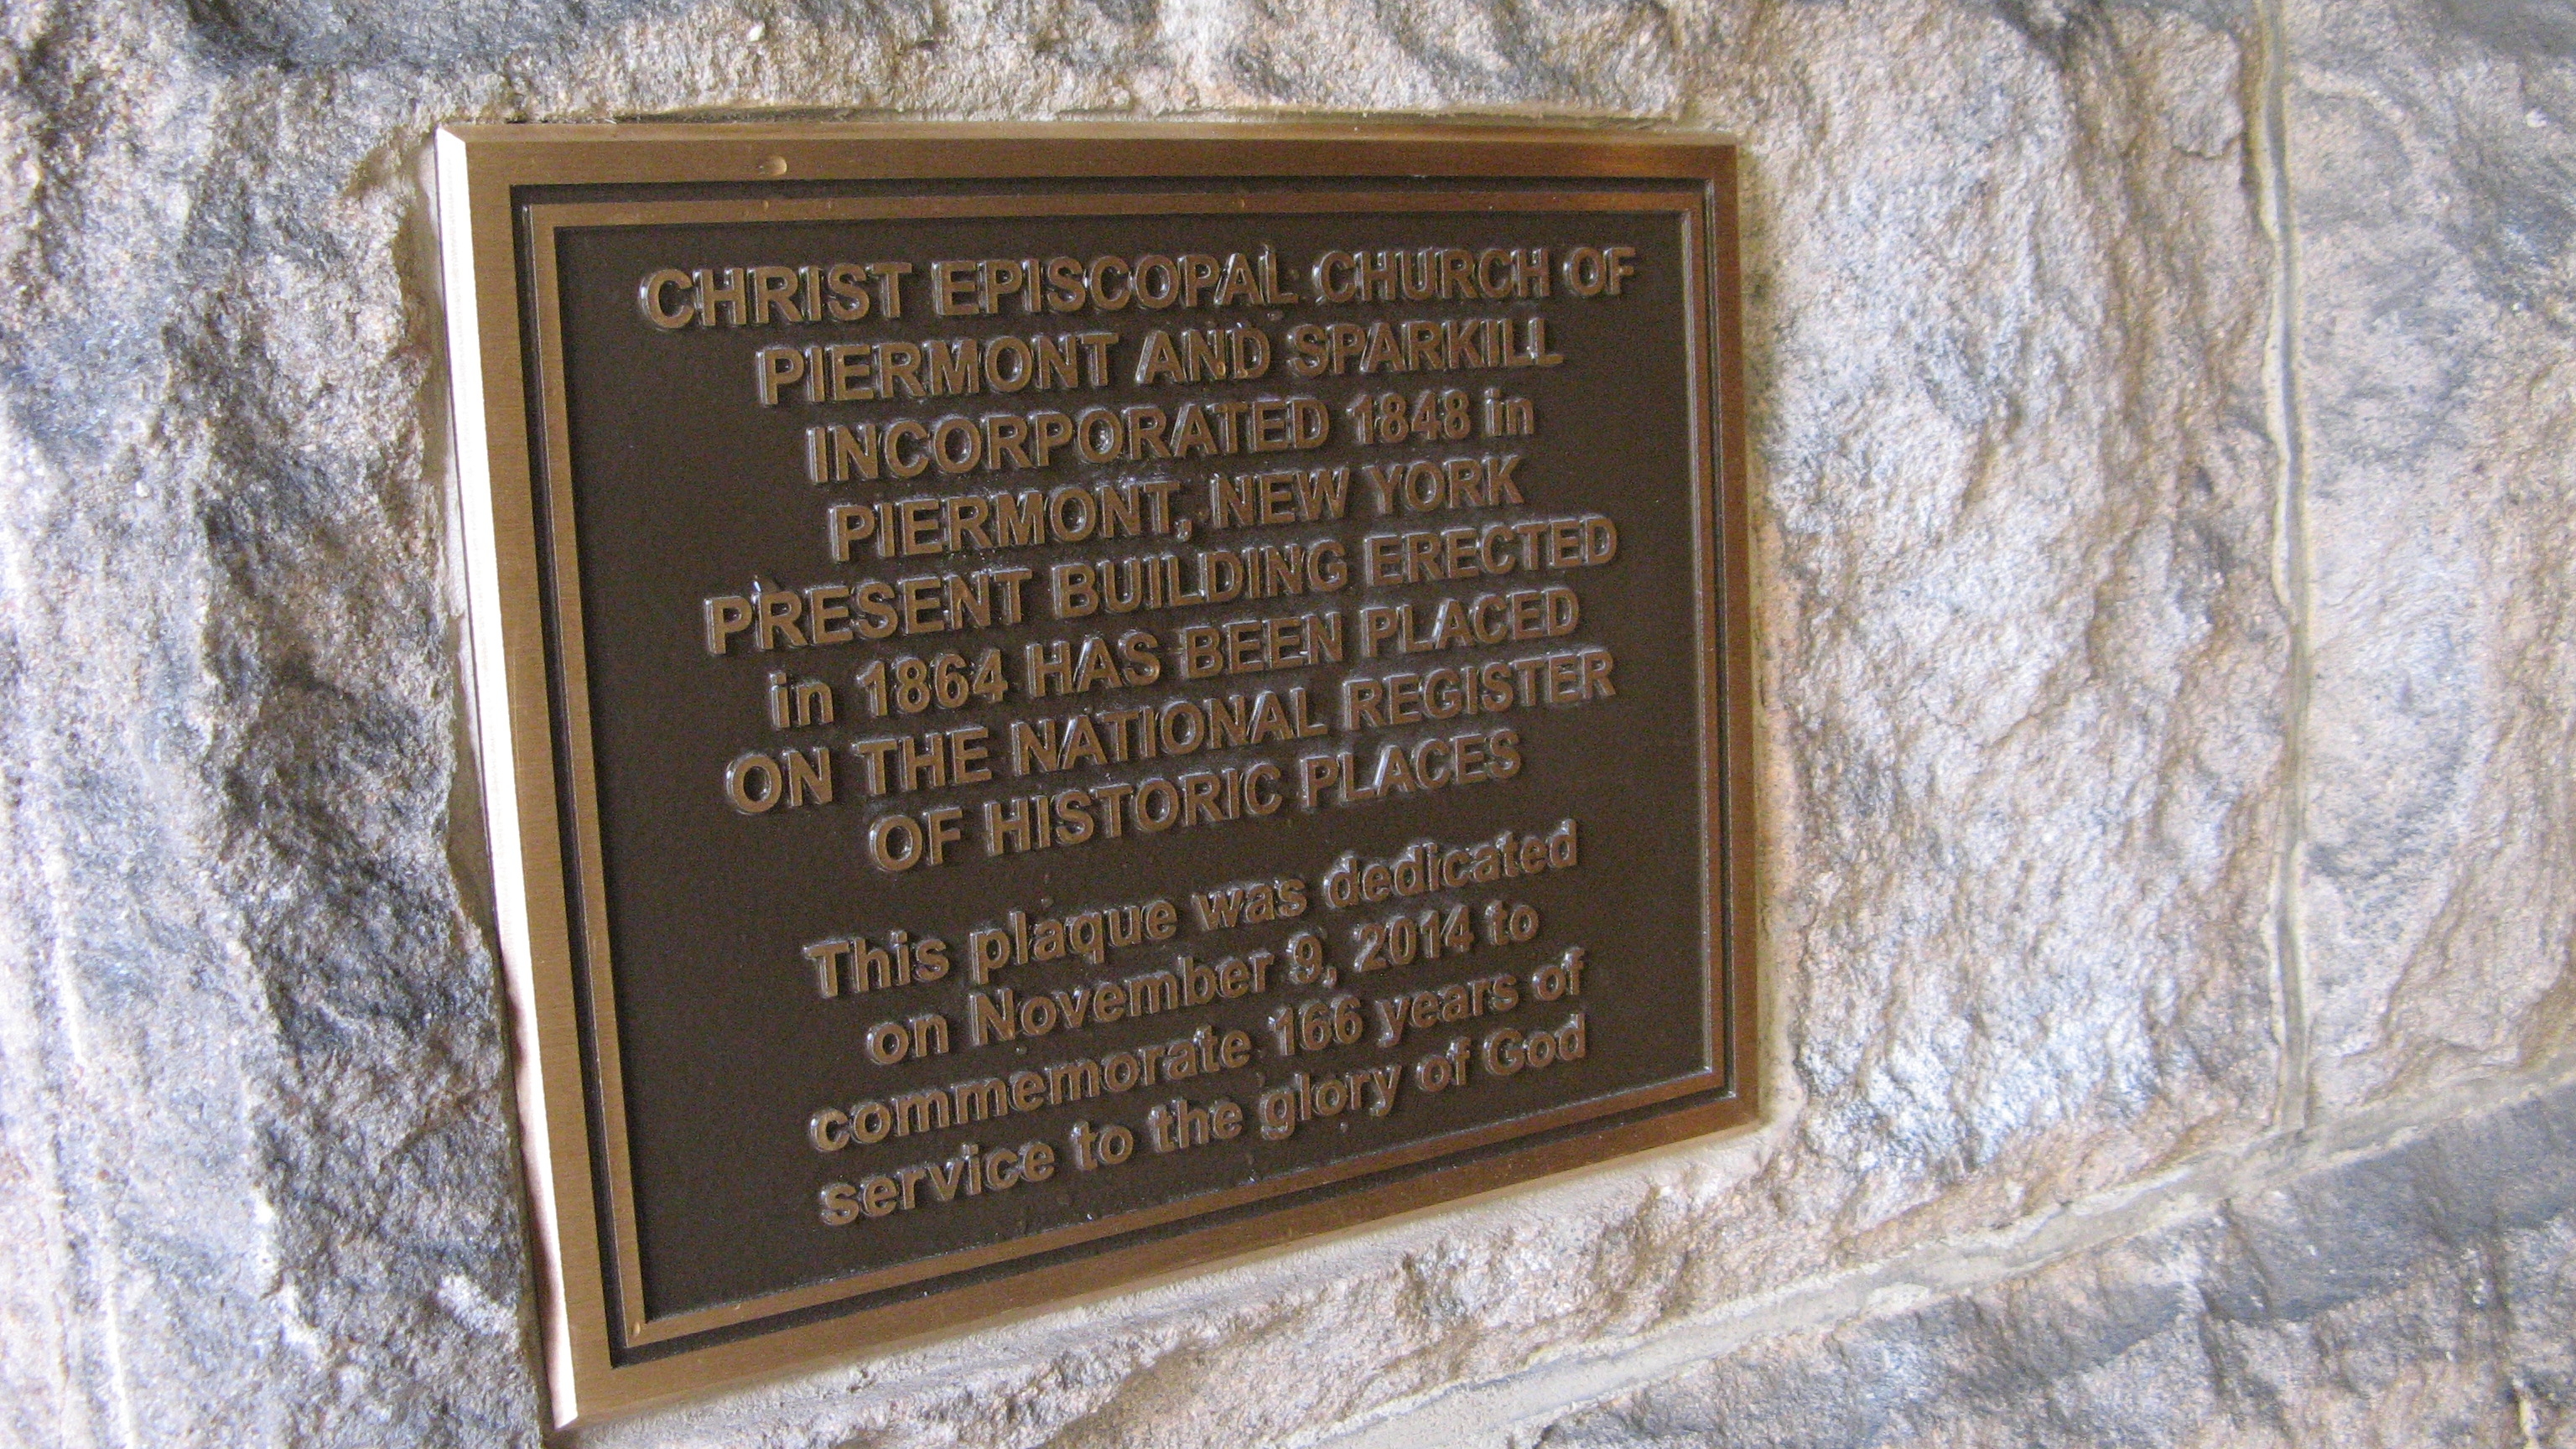 A additional Christ Episcopal Church of Piermont and Sparkill Marker